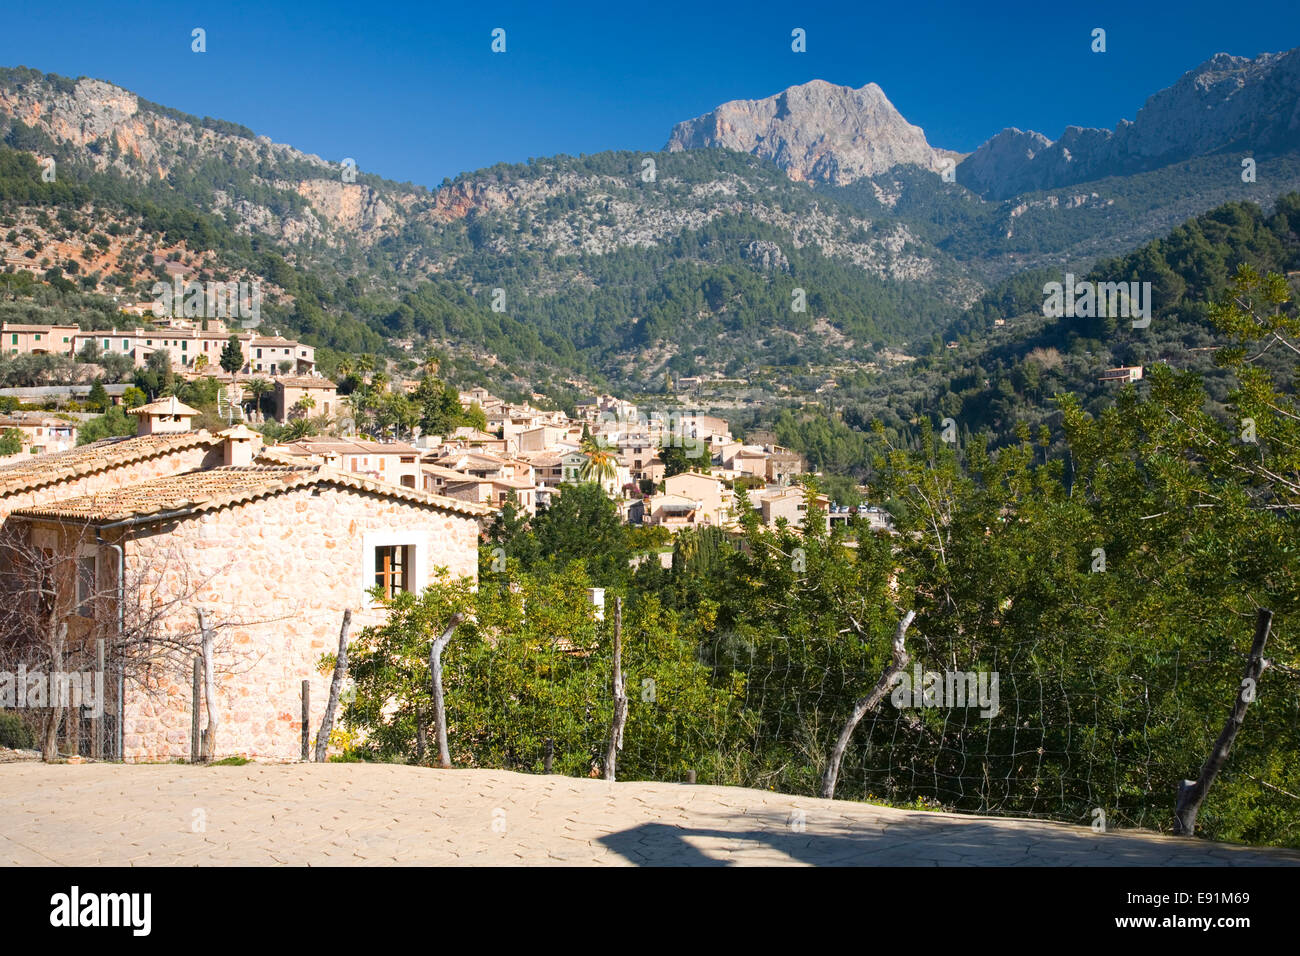 Fornalutx, Mallorca, Balearic Islands, Spain. View across village rooftops to Puig Major, the island's highest peak. Stock Photo